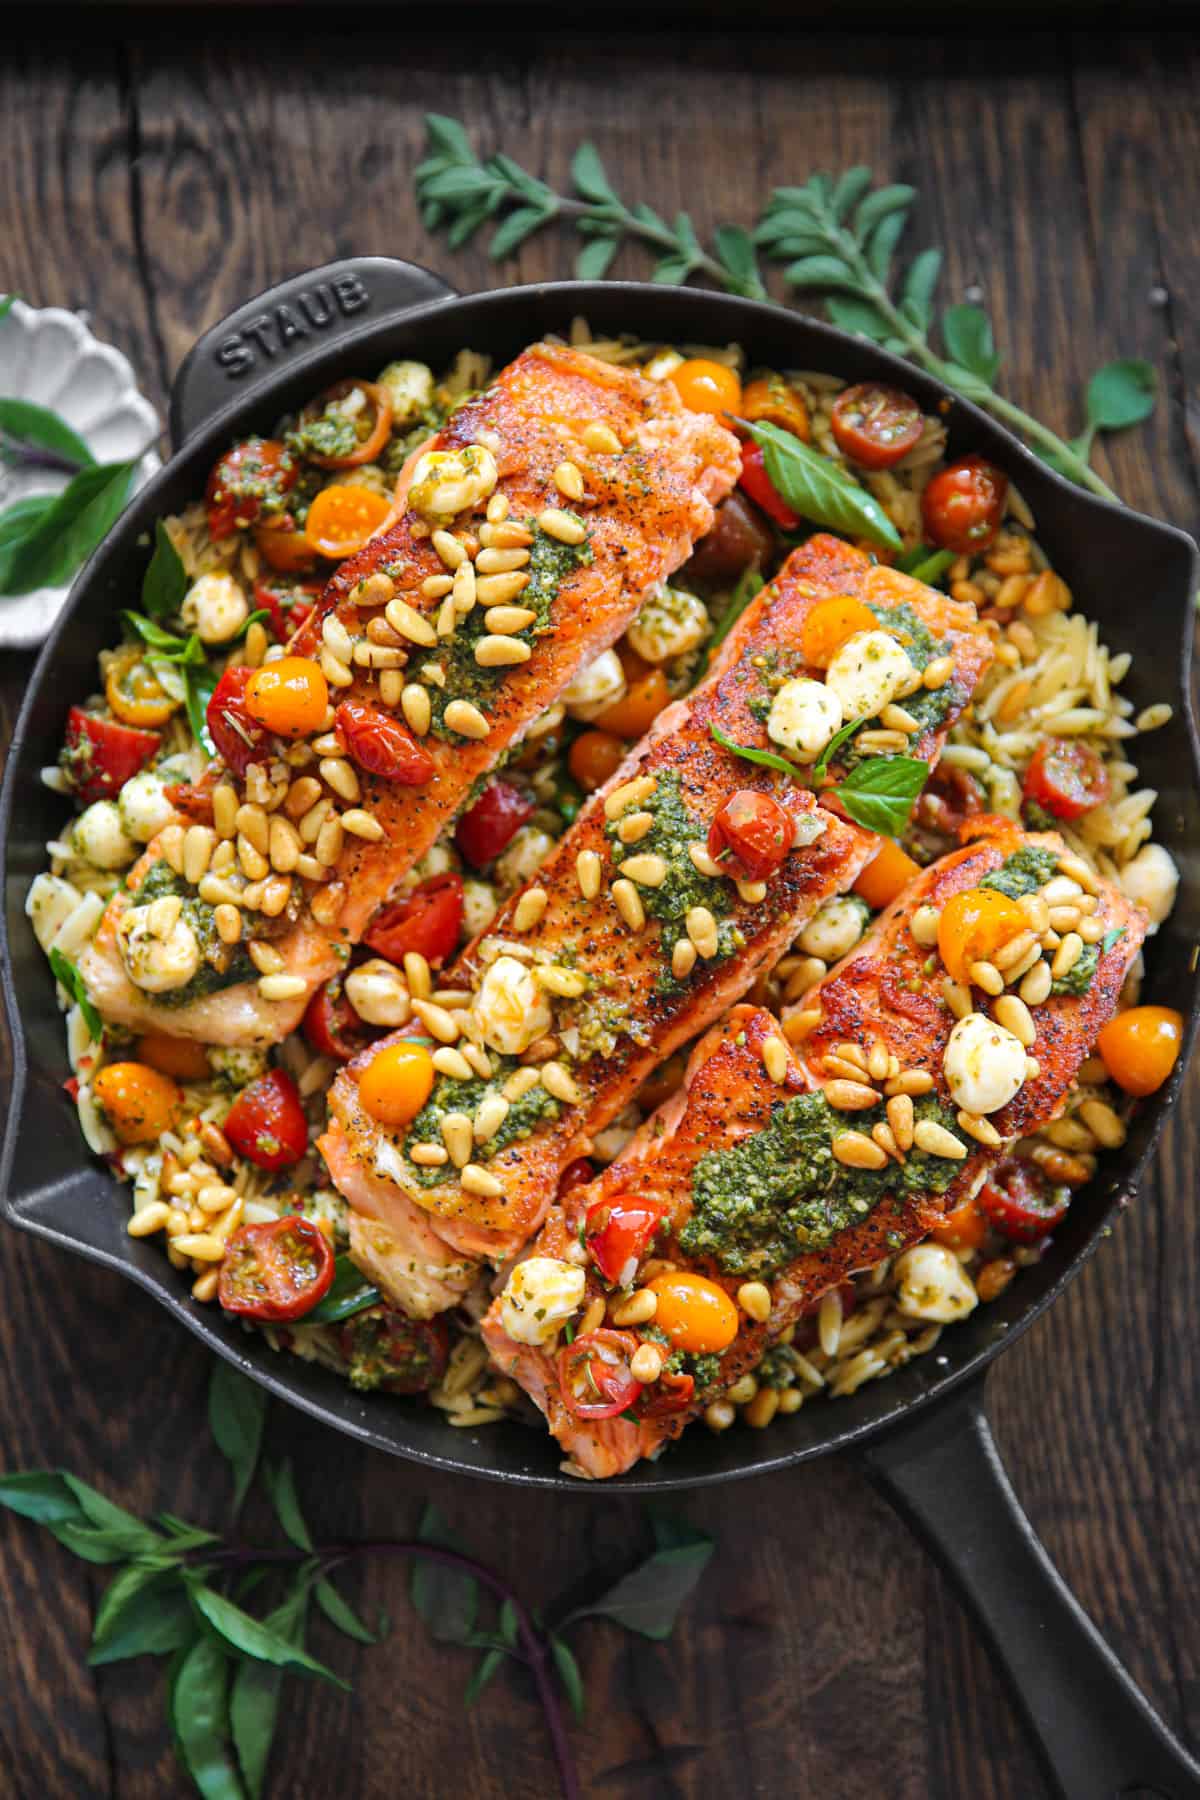 Salmon fillets with orzo, basil pesto, grape tomatoes, Mozzarella cheese, and pine nuts - in a cast iron skillet.